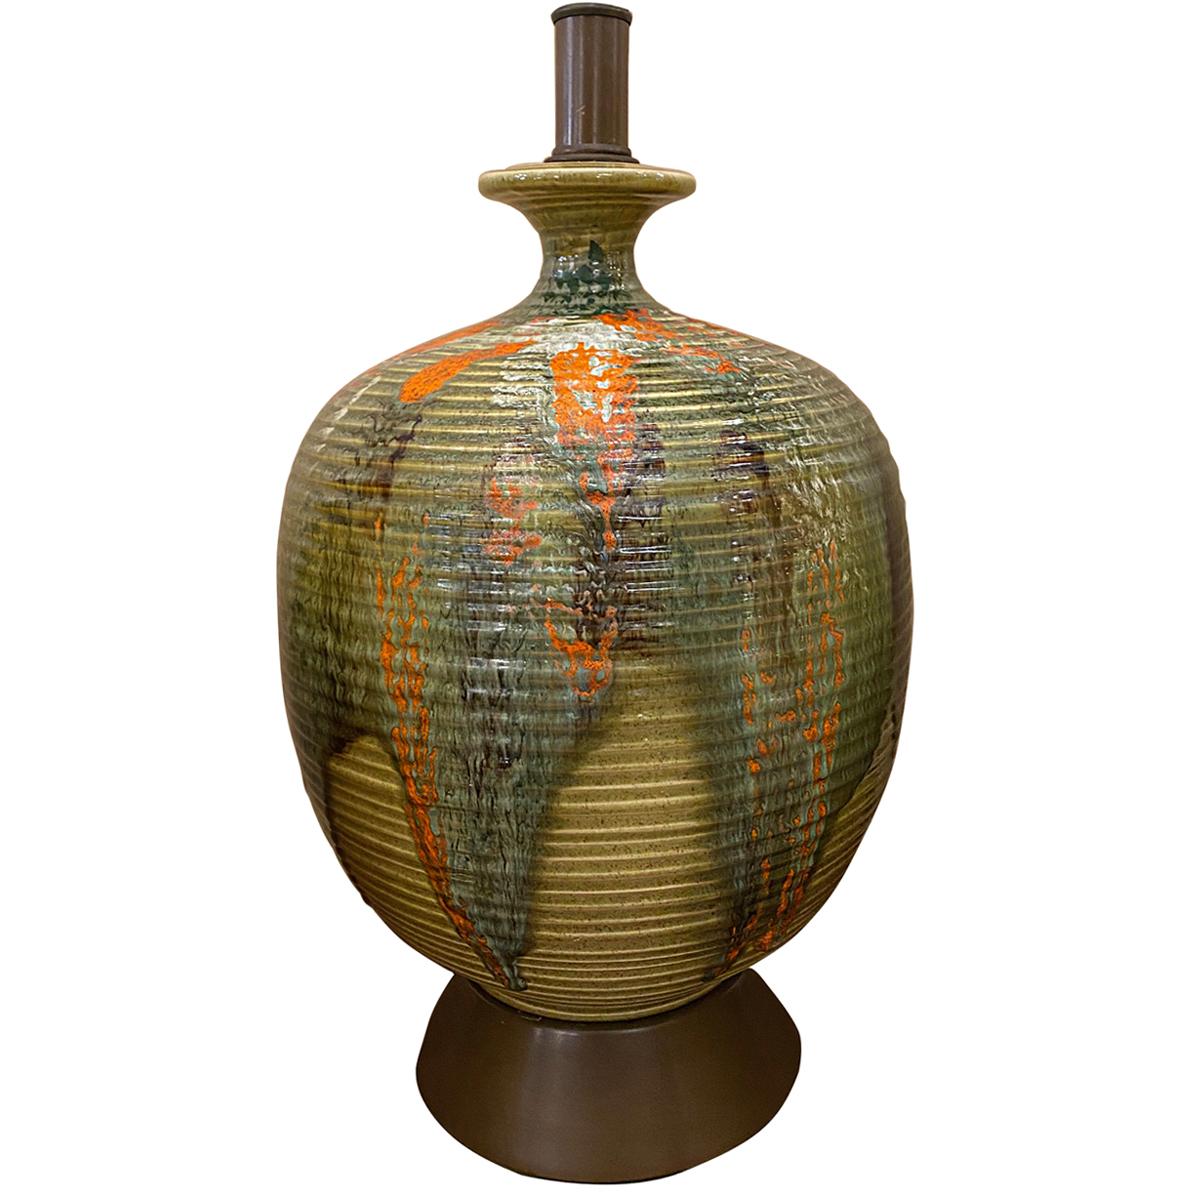 A single circa 1960's Italian glazed and textured ceramic table lamp with wooden base.

Measurements:
Height of body: 18